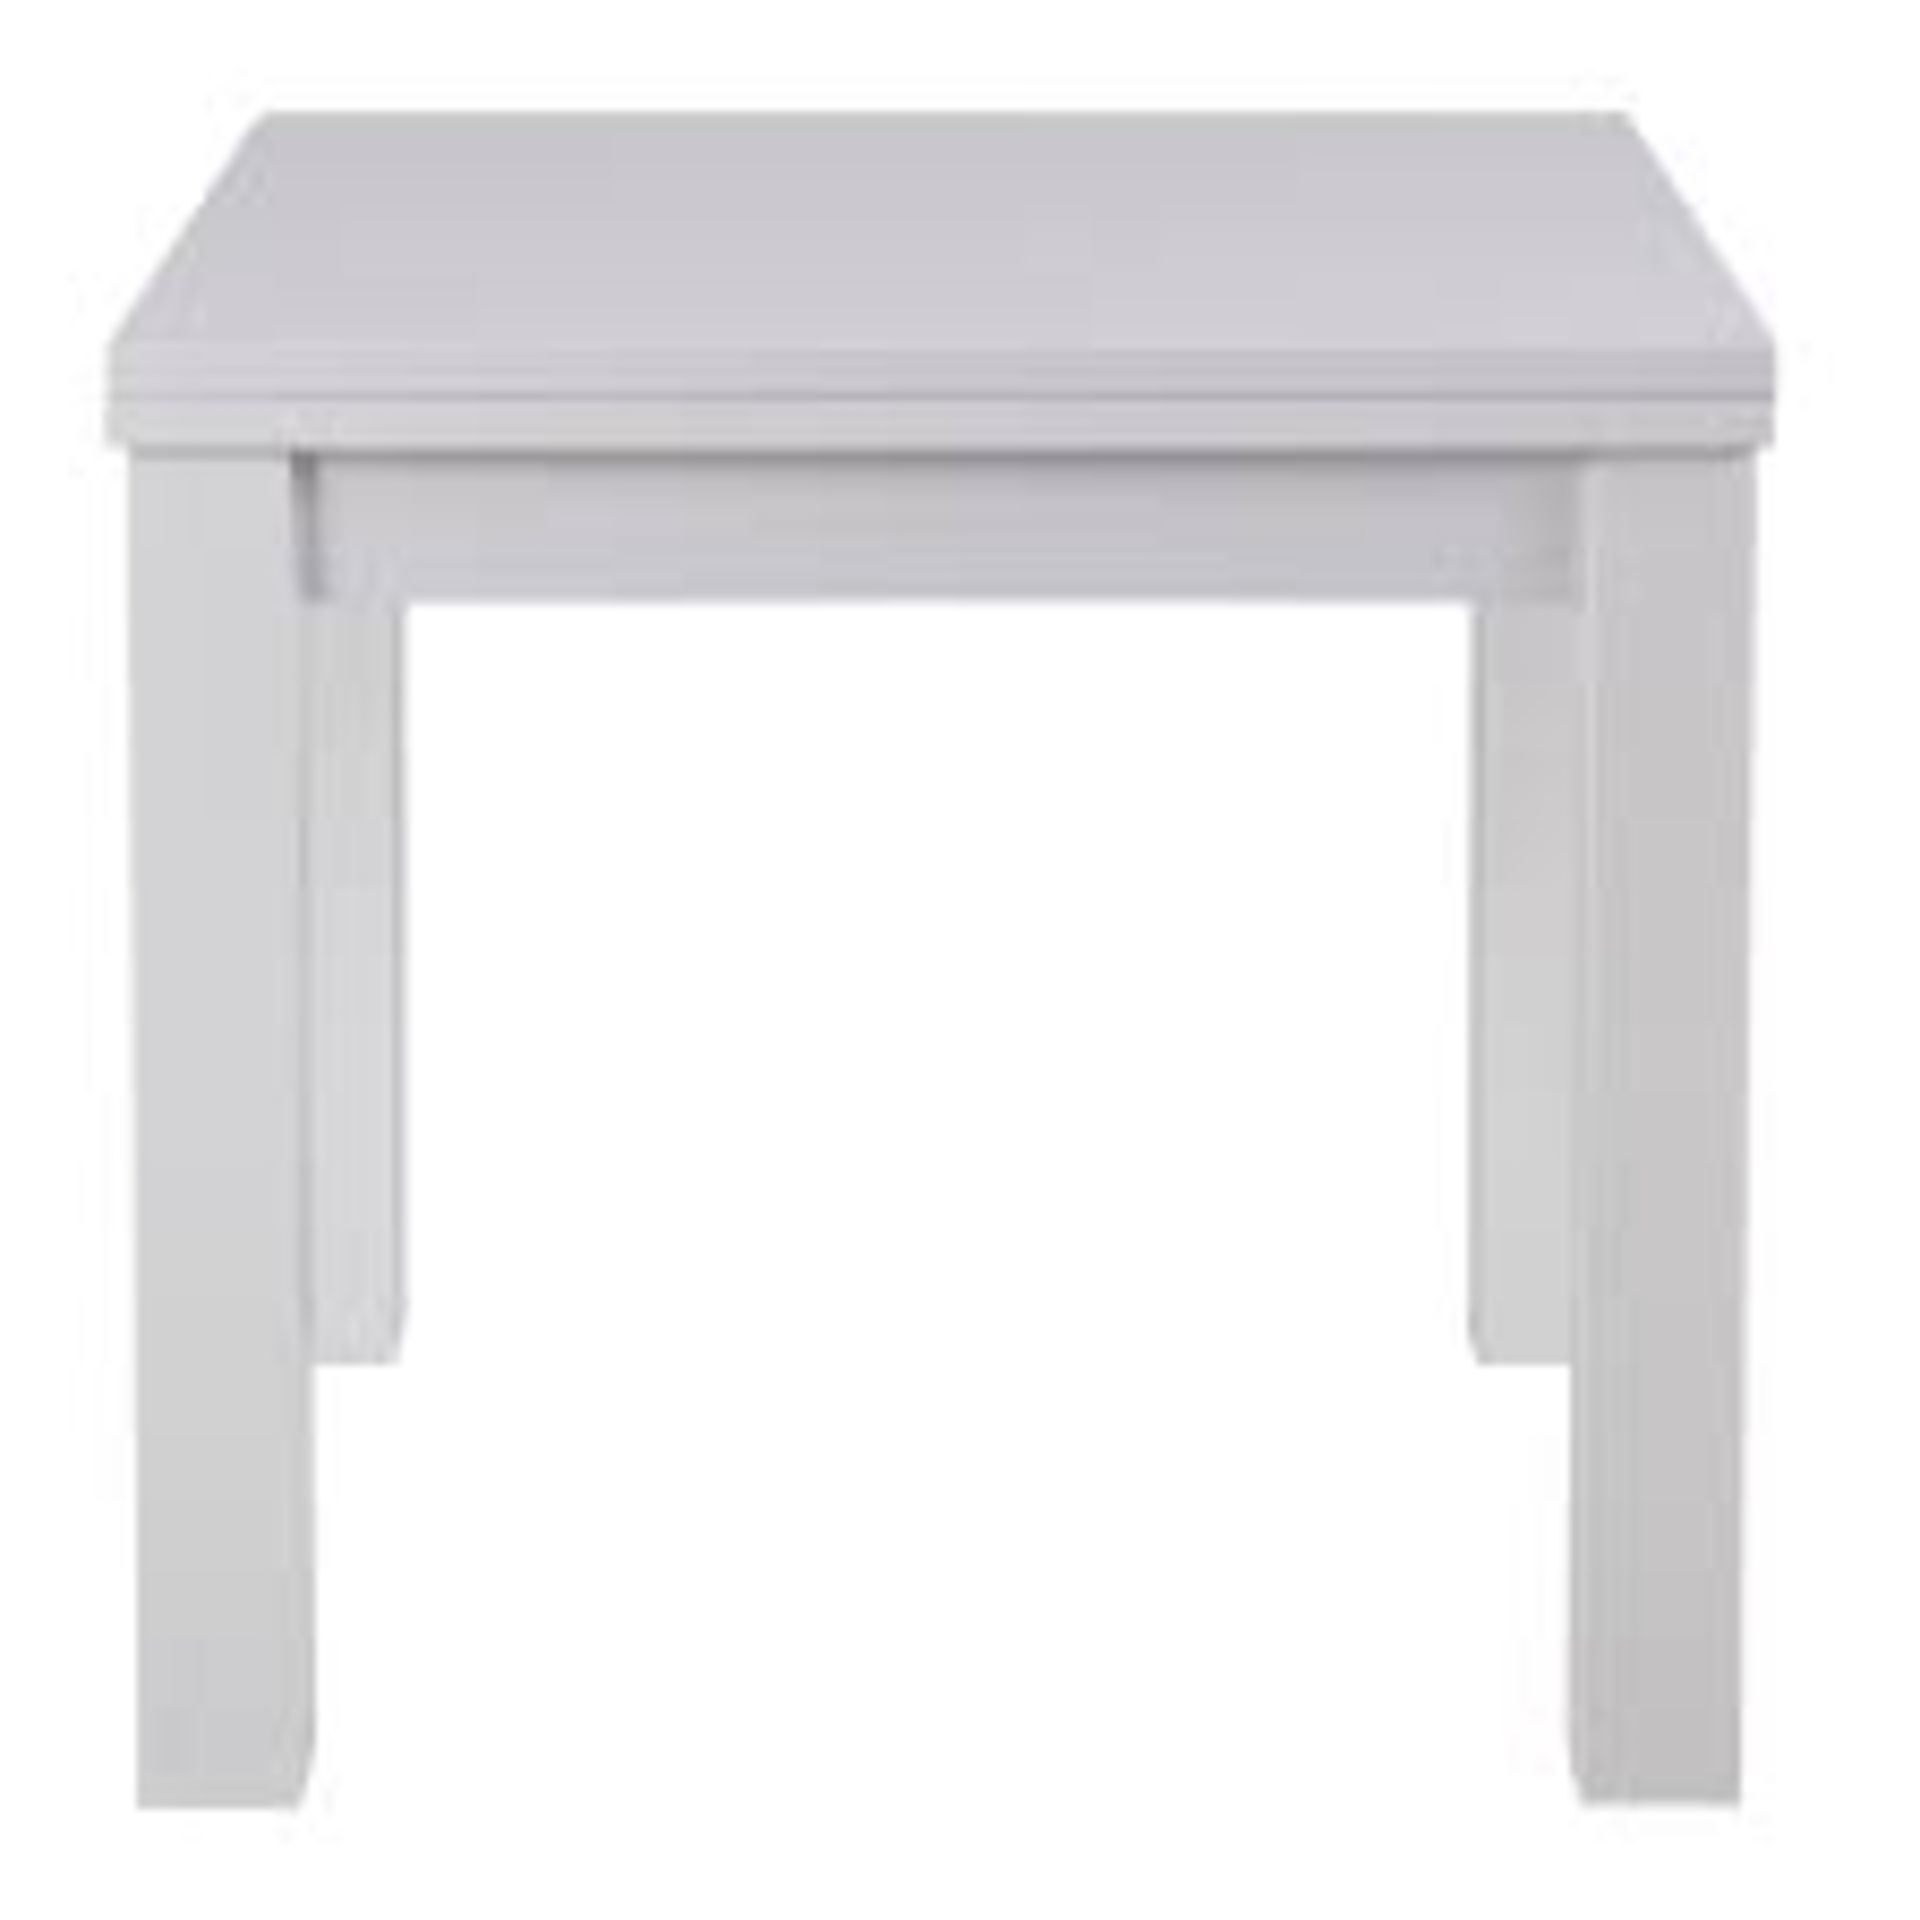 Boxed Arendelle White Square Designer Dining Table RRP £190 (14711) (Public Viewing and Appraisals